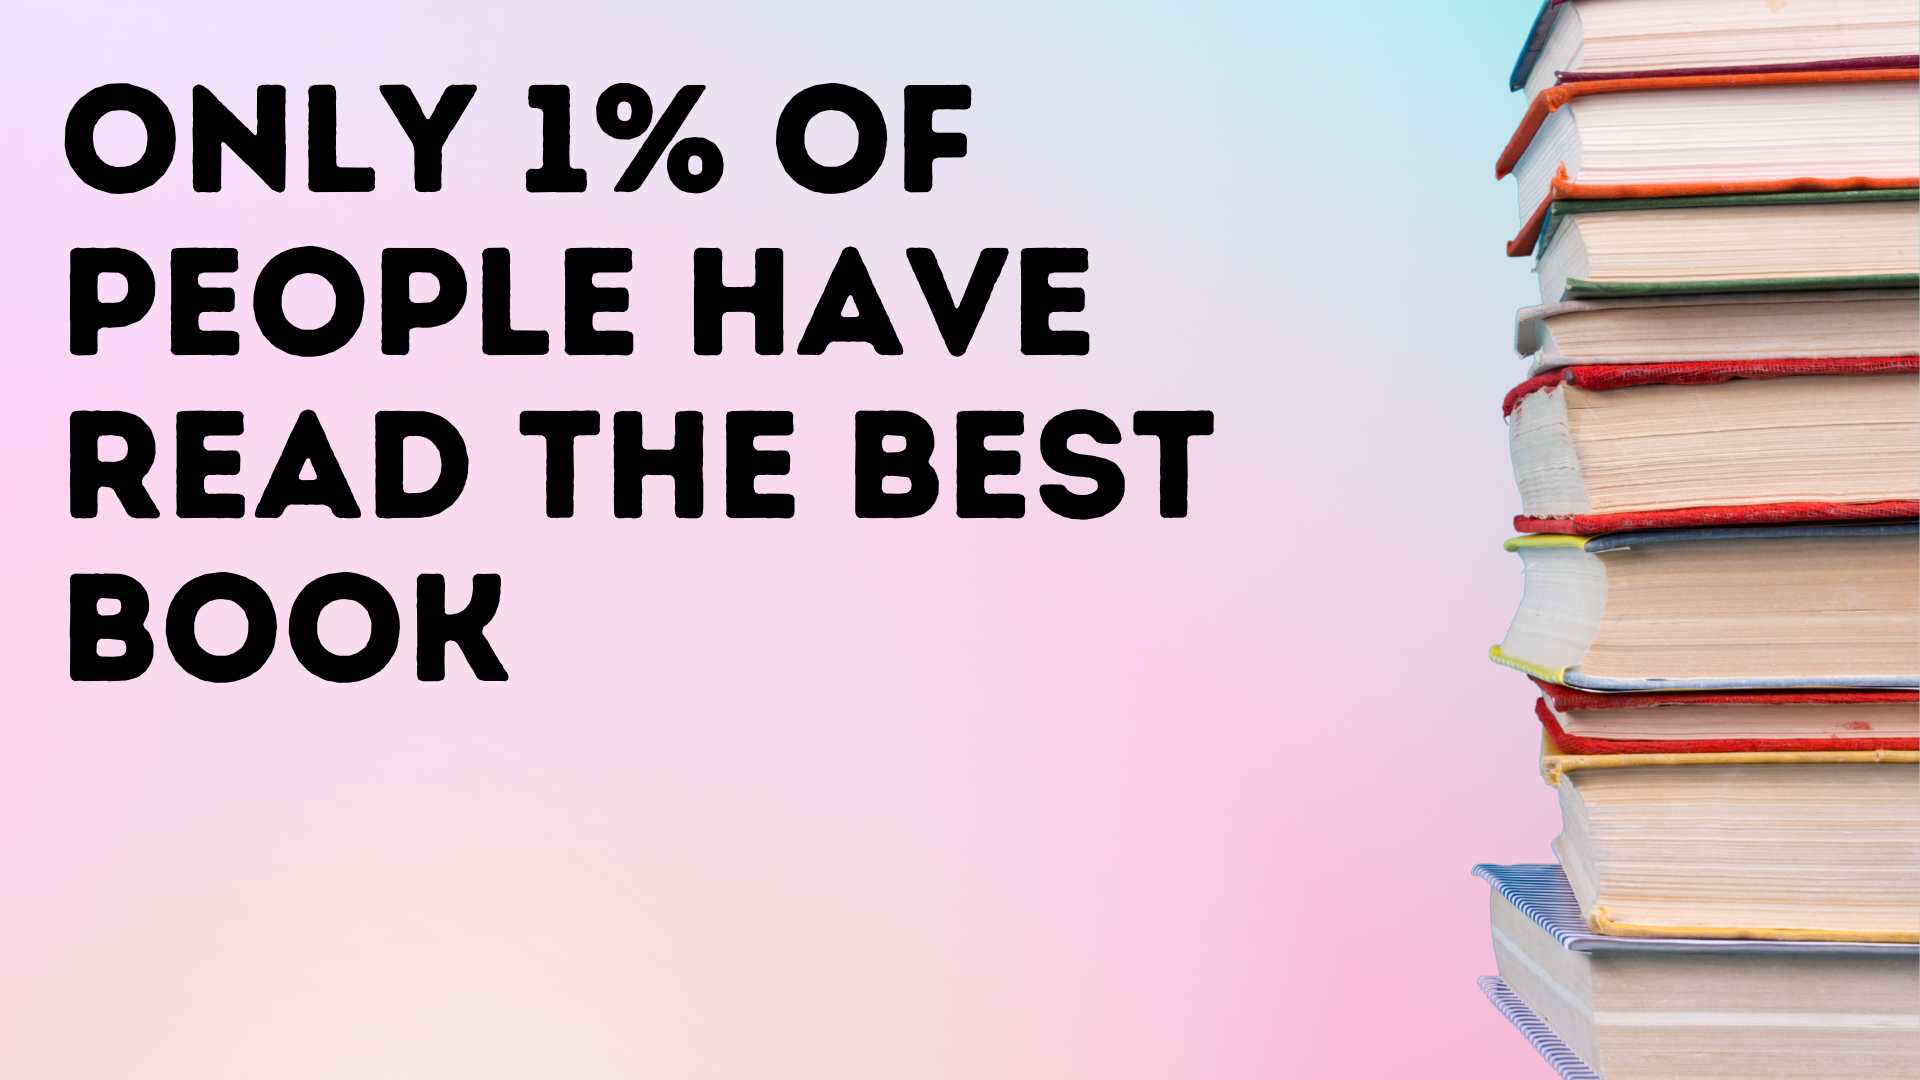 Only 1% of People Have Read the Best Book